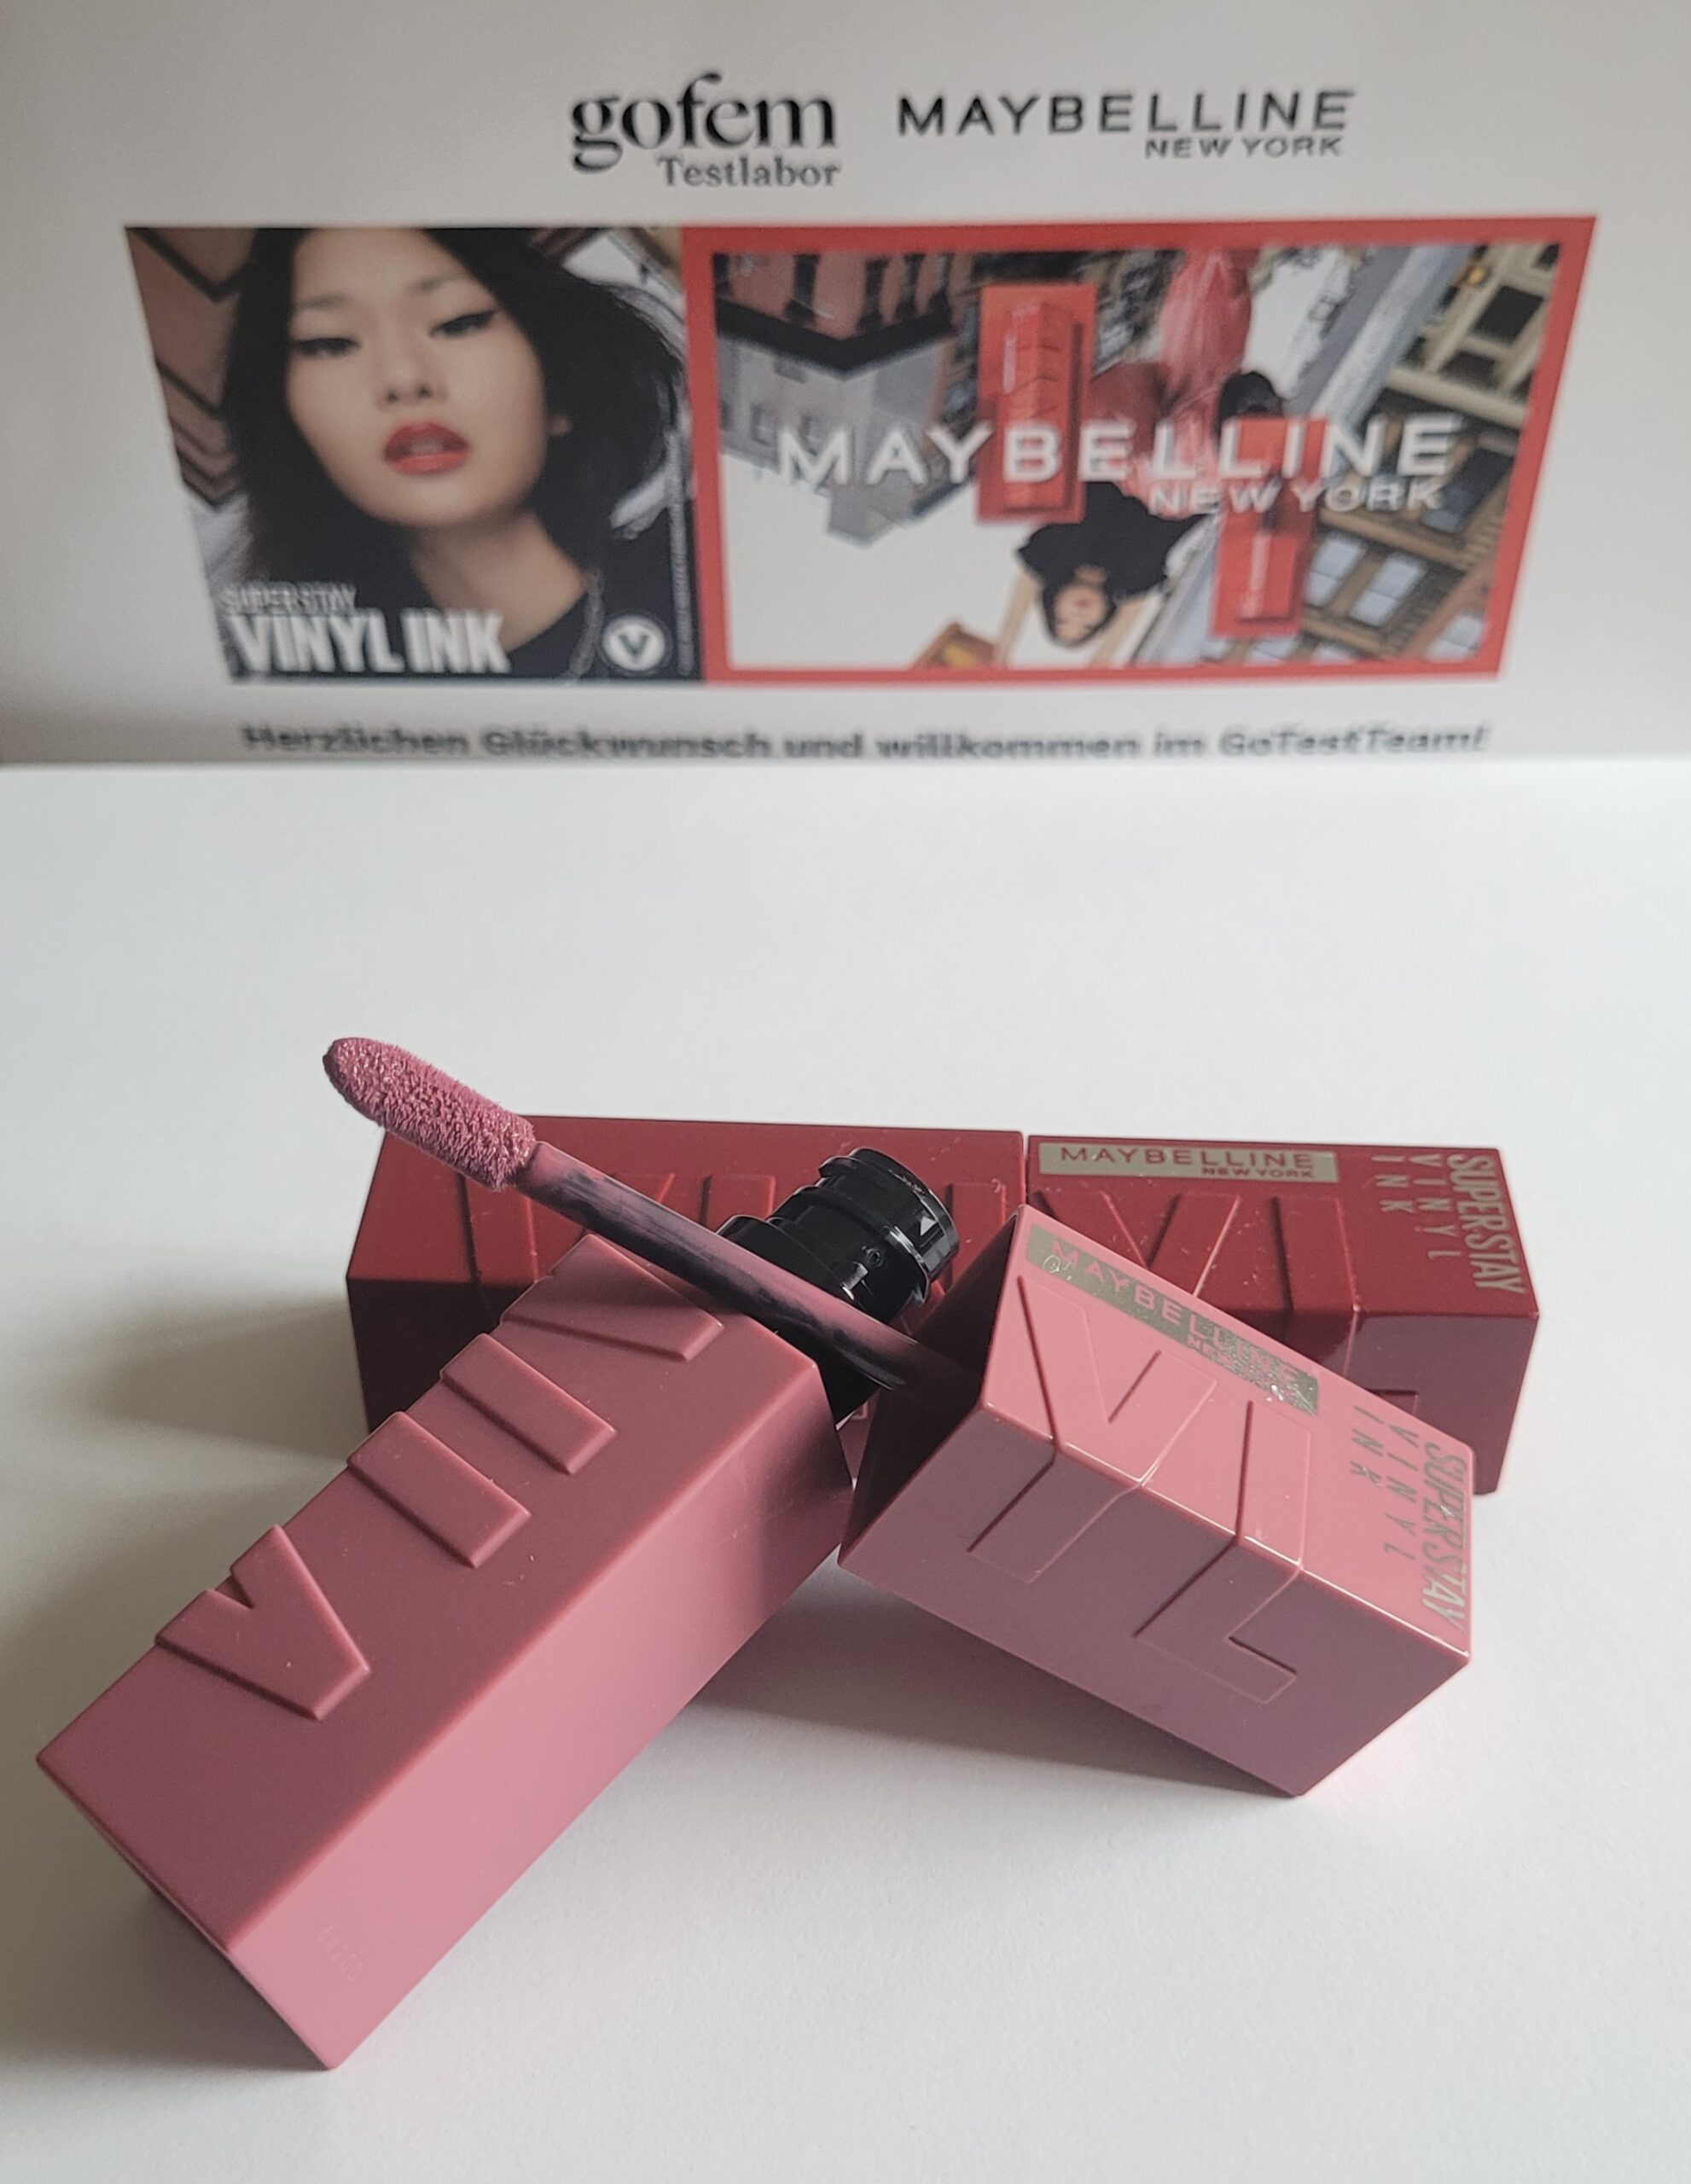 You are currently viewing Vinyl Ink Lippenstift von Maybelline New York<span class='yasr-stars-title-average'><div class='yasr-stars-title yasr-rater-stars'
                           id='yasr-overall-rating-rater-166965386fbb9'
                           data-rating='4'
                           data-rater-starsize='16'>
                       </div></span>